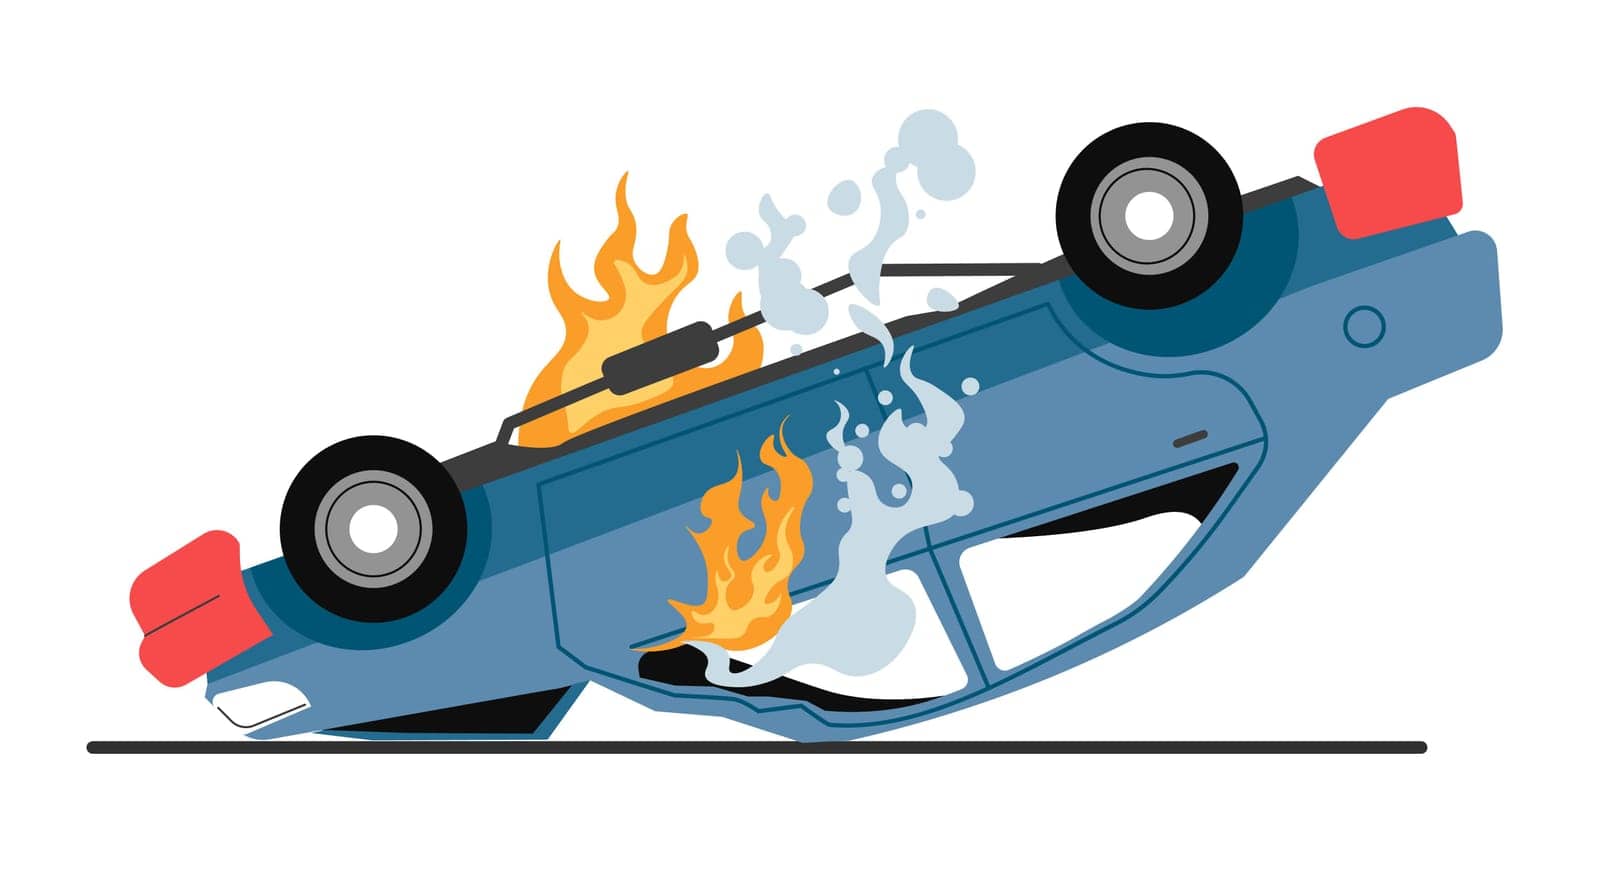 Burning car with damaged body, traffic accident or breakage by Sonulkaster